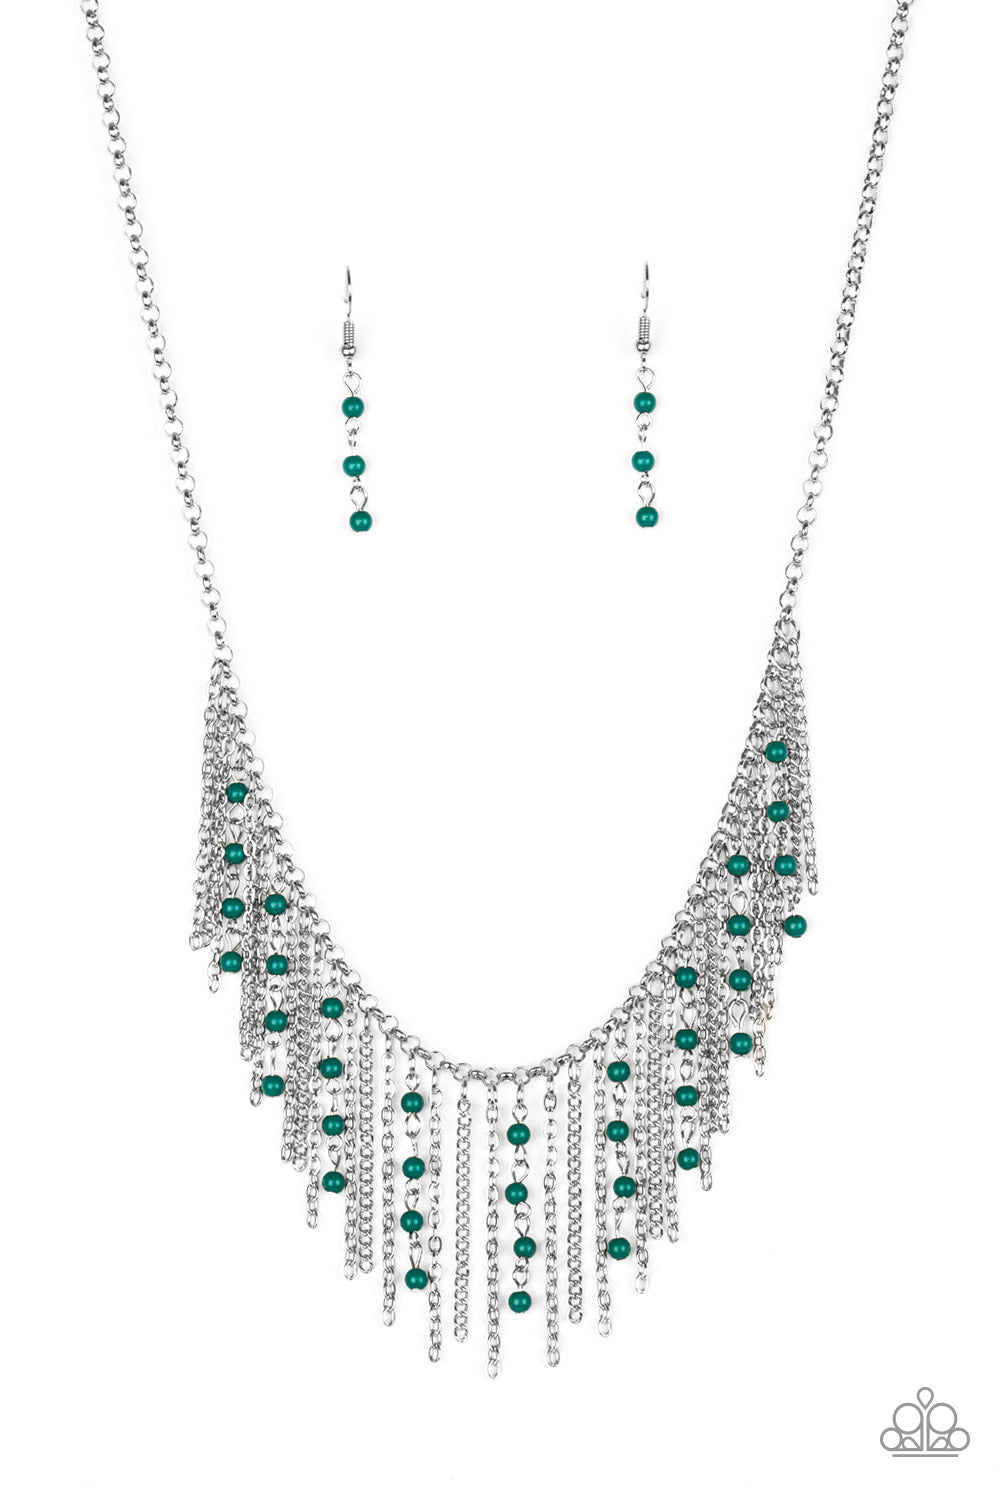 Paparazzi Necklaces - Harlem Hideaway - Green